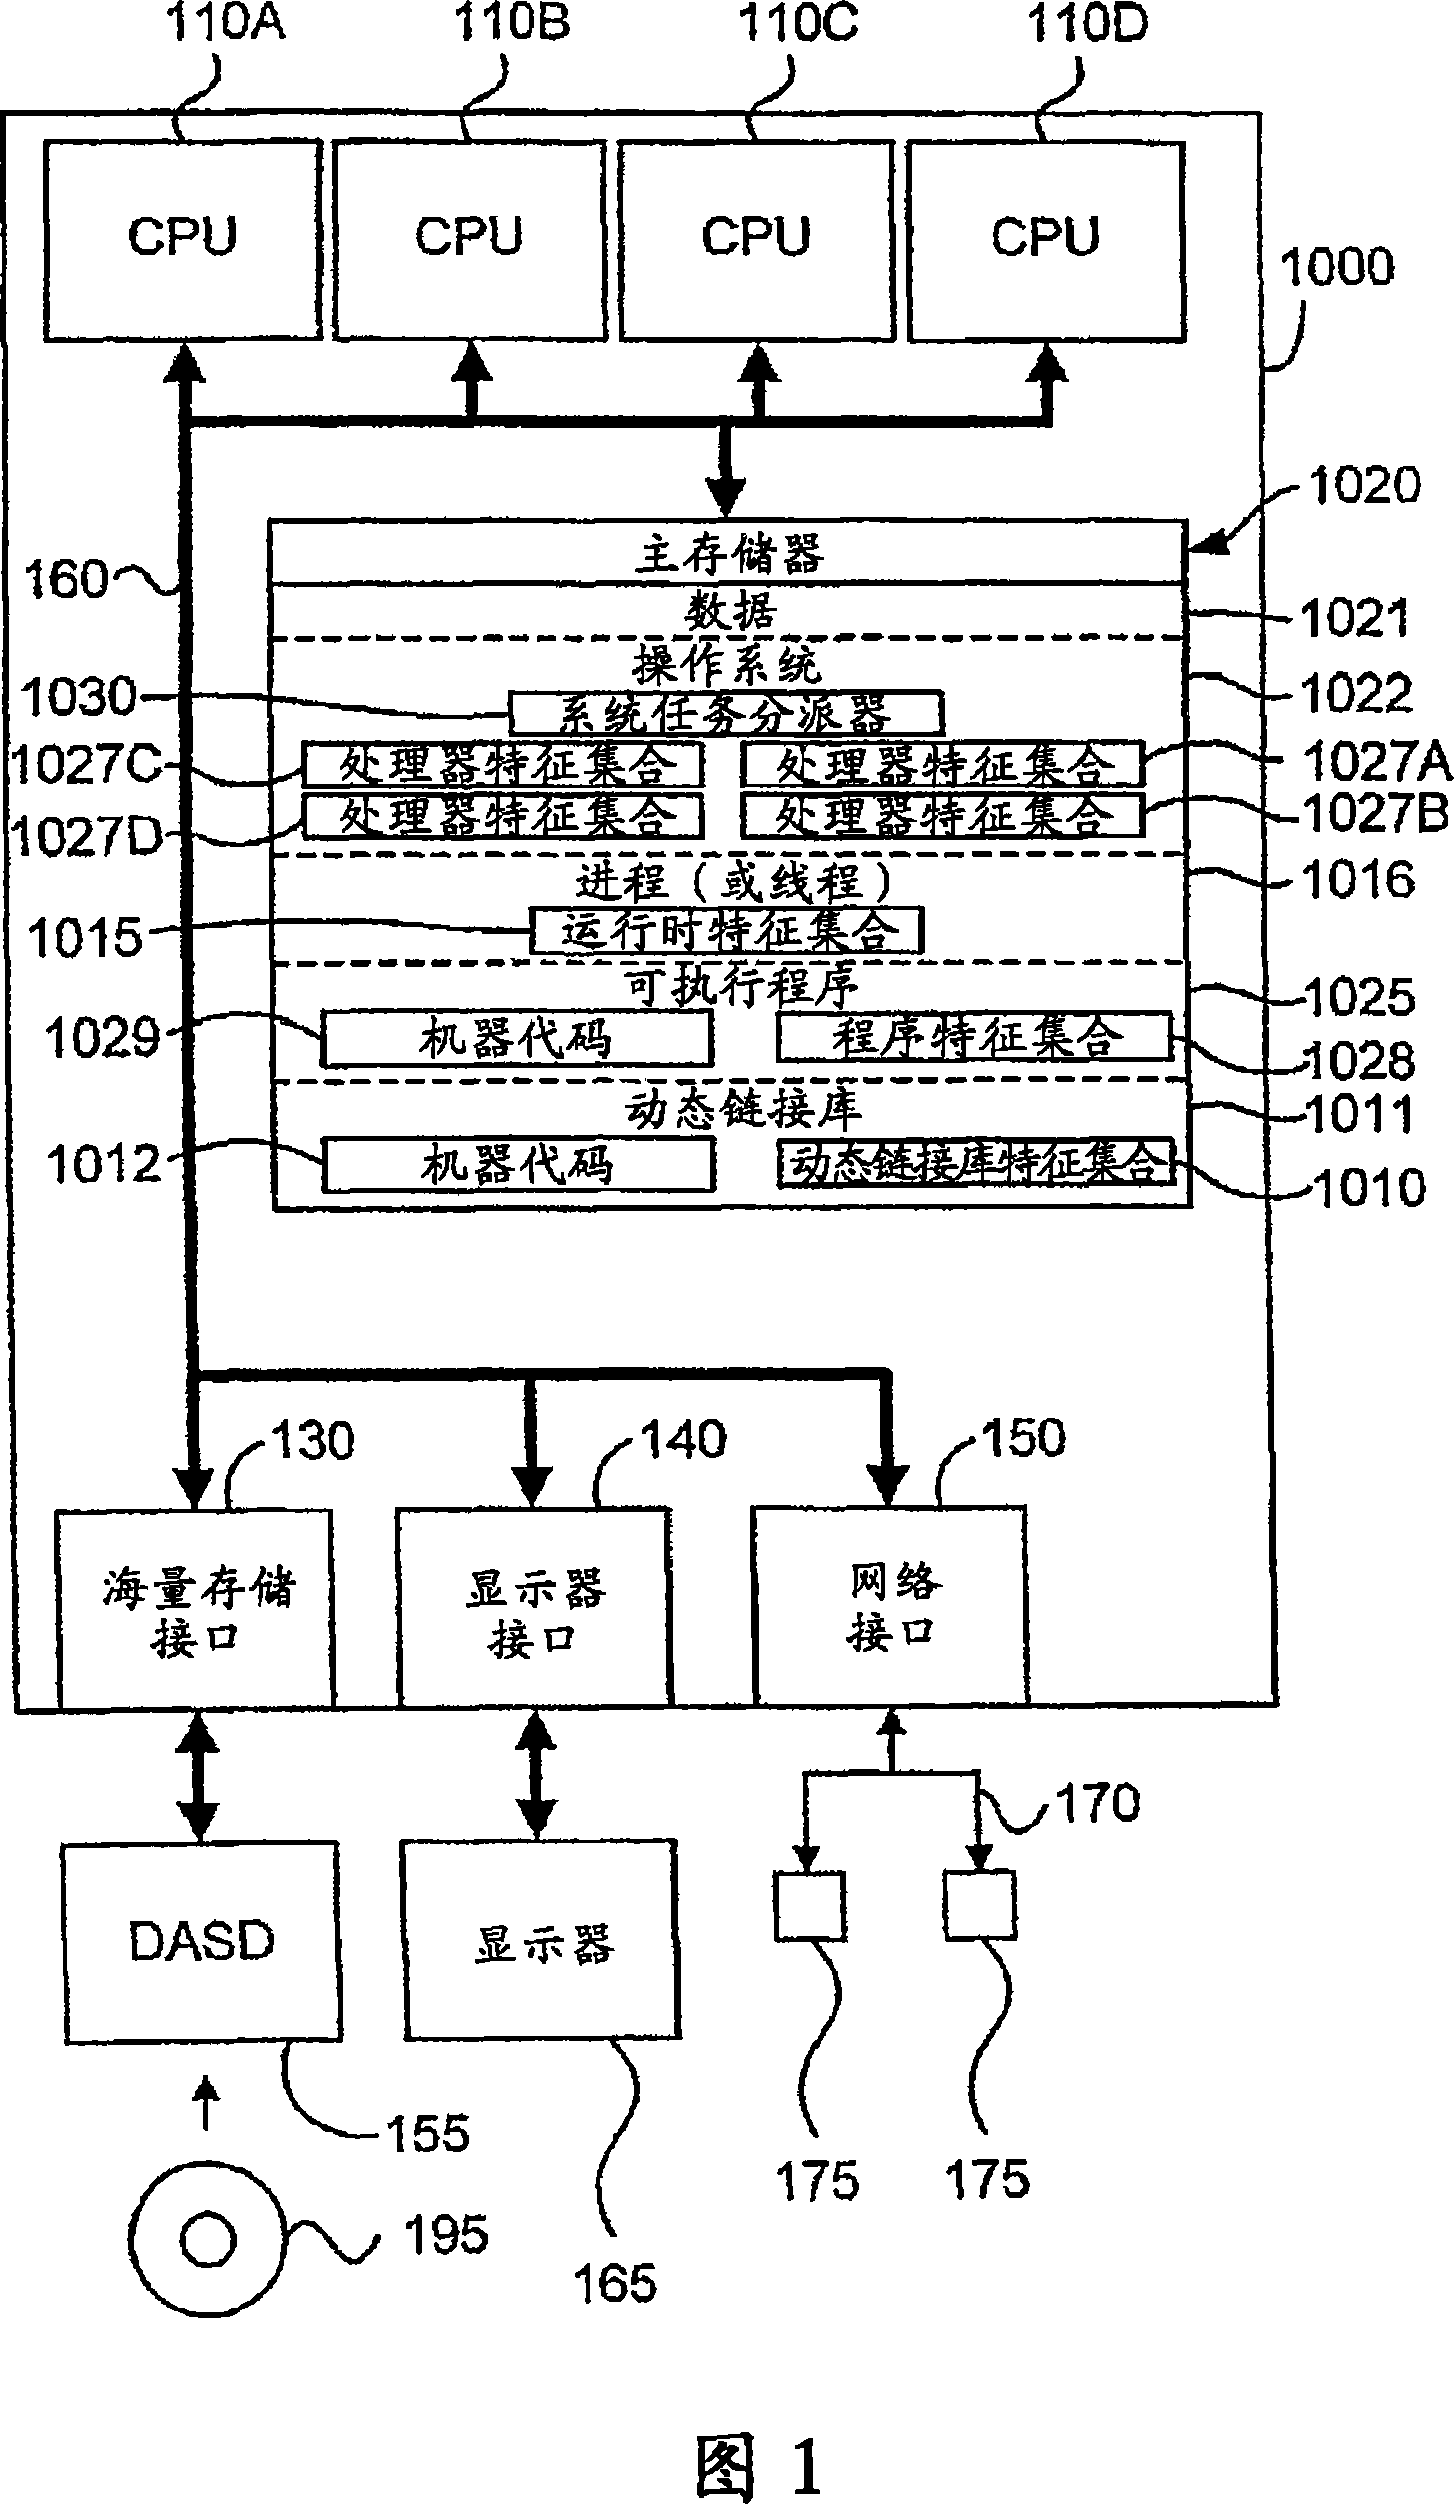 Adaptive process dispatch in a computer system having a plurality of processors